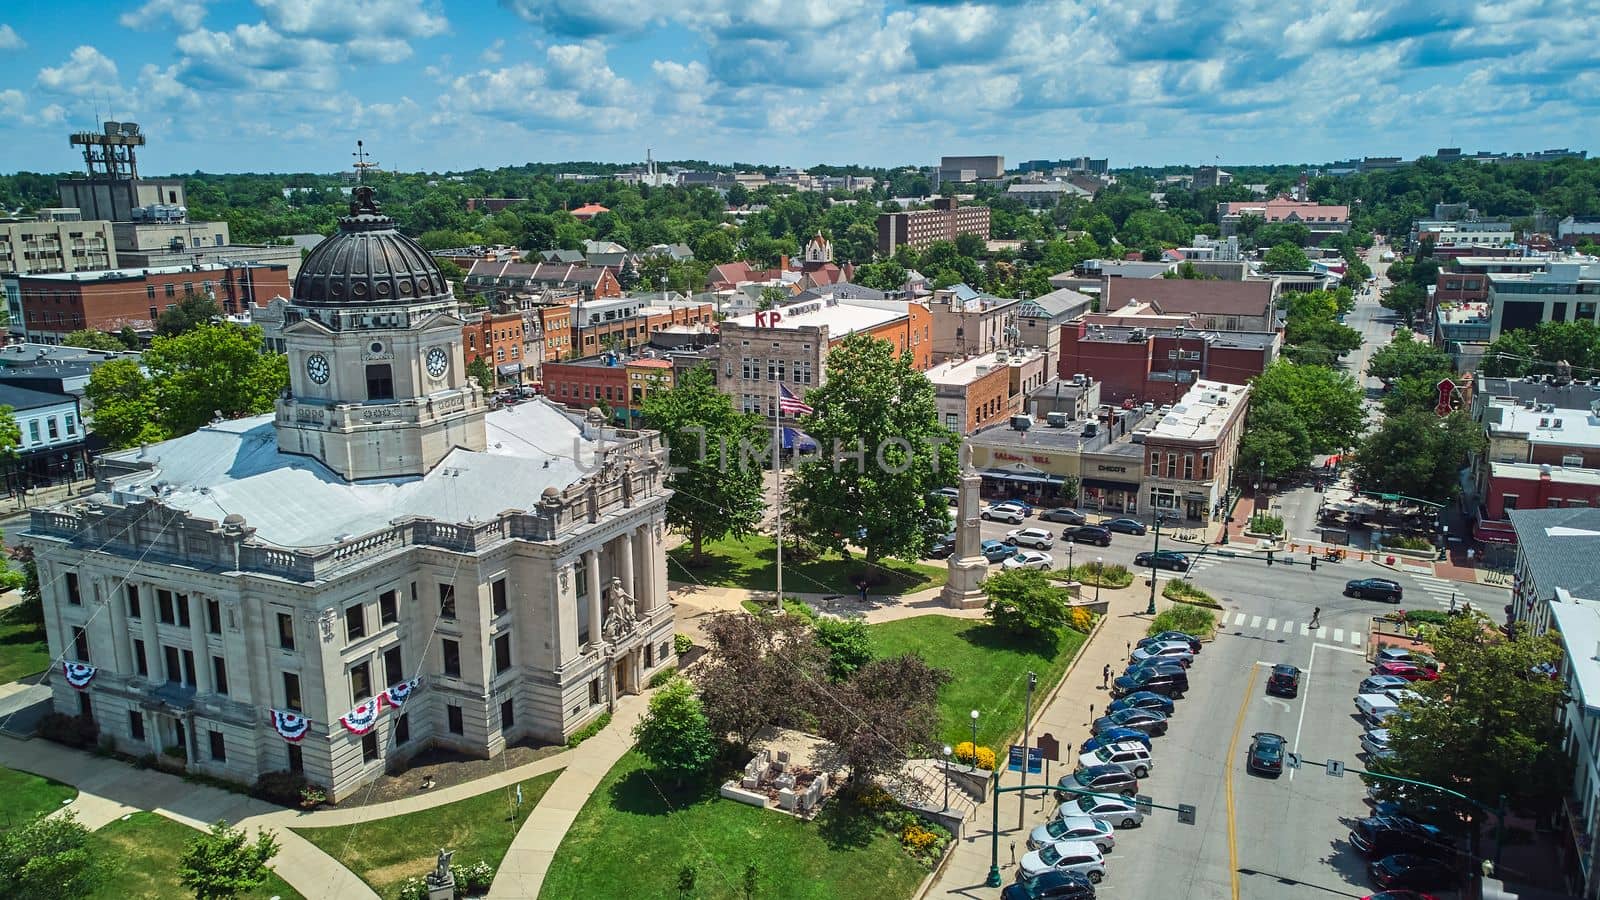 Bloomington Indiana downtown The Square with courthouse aerial by njproductions